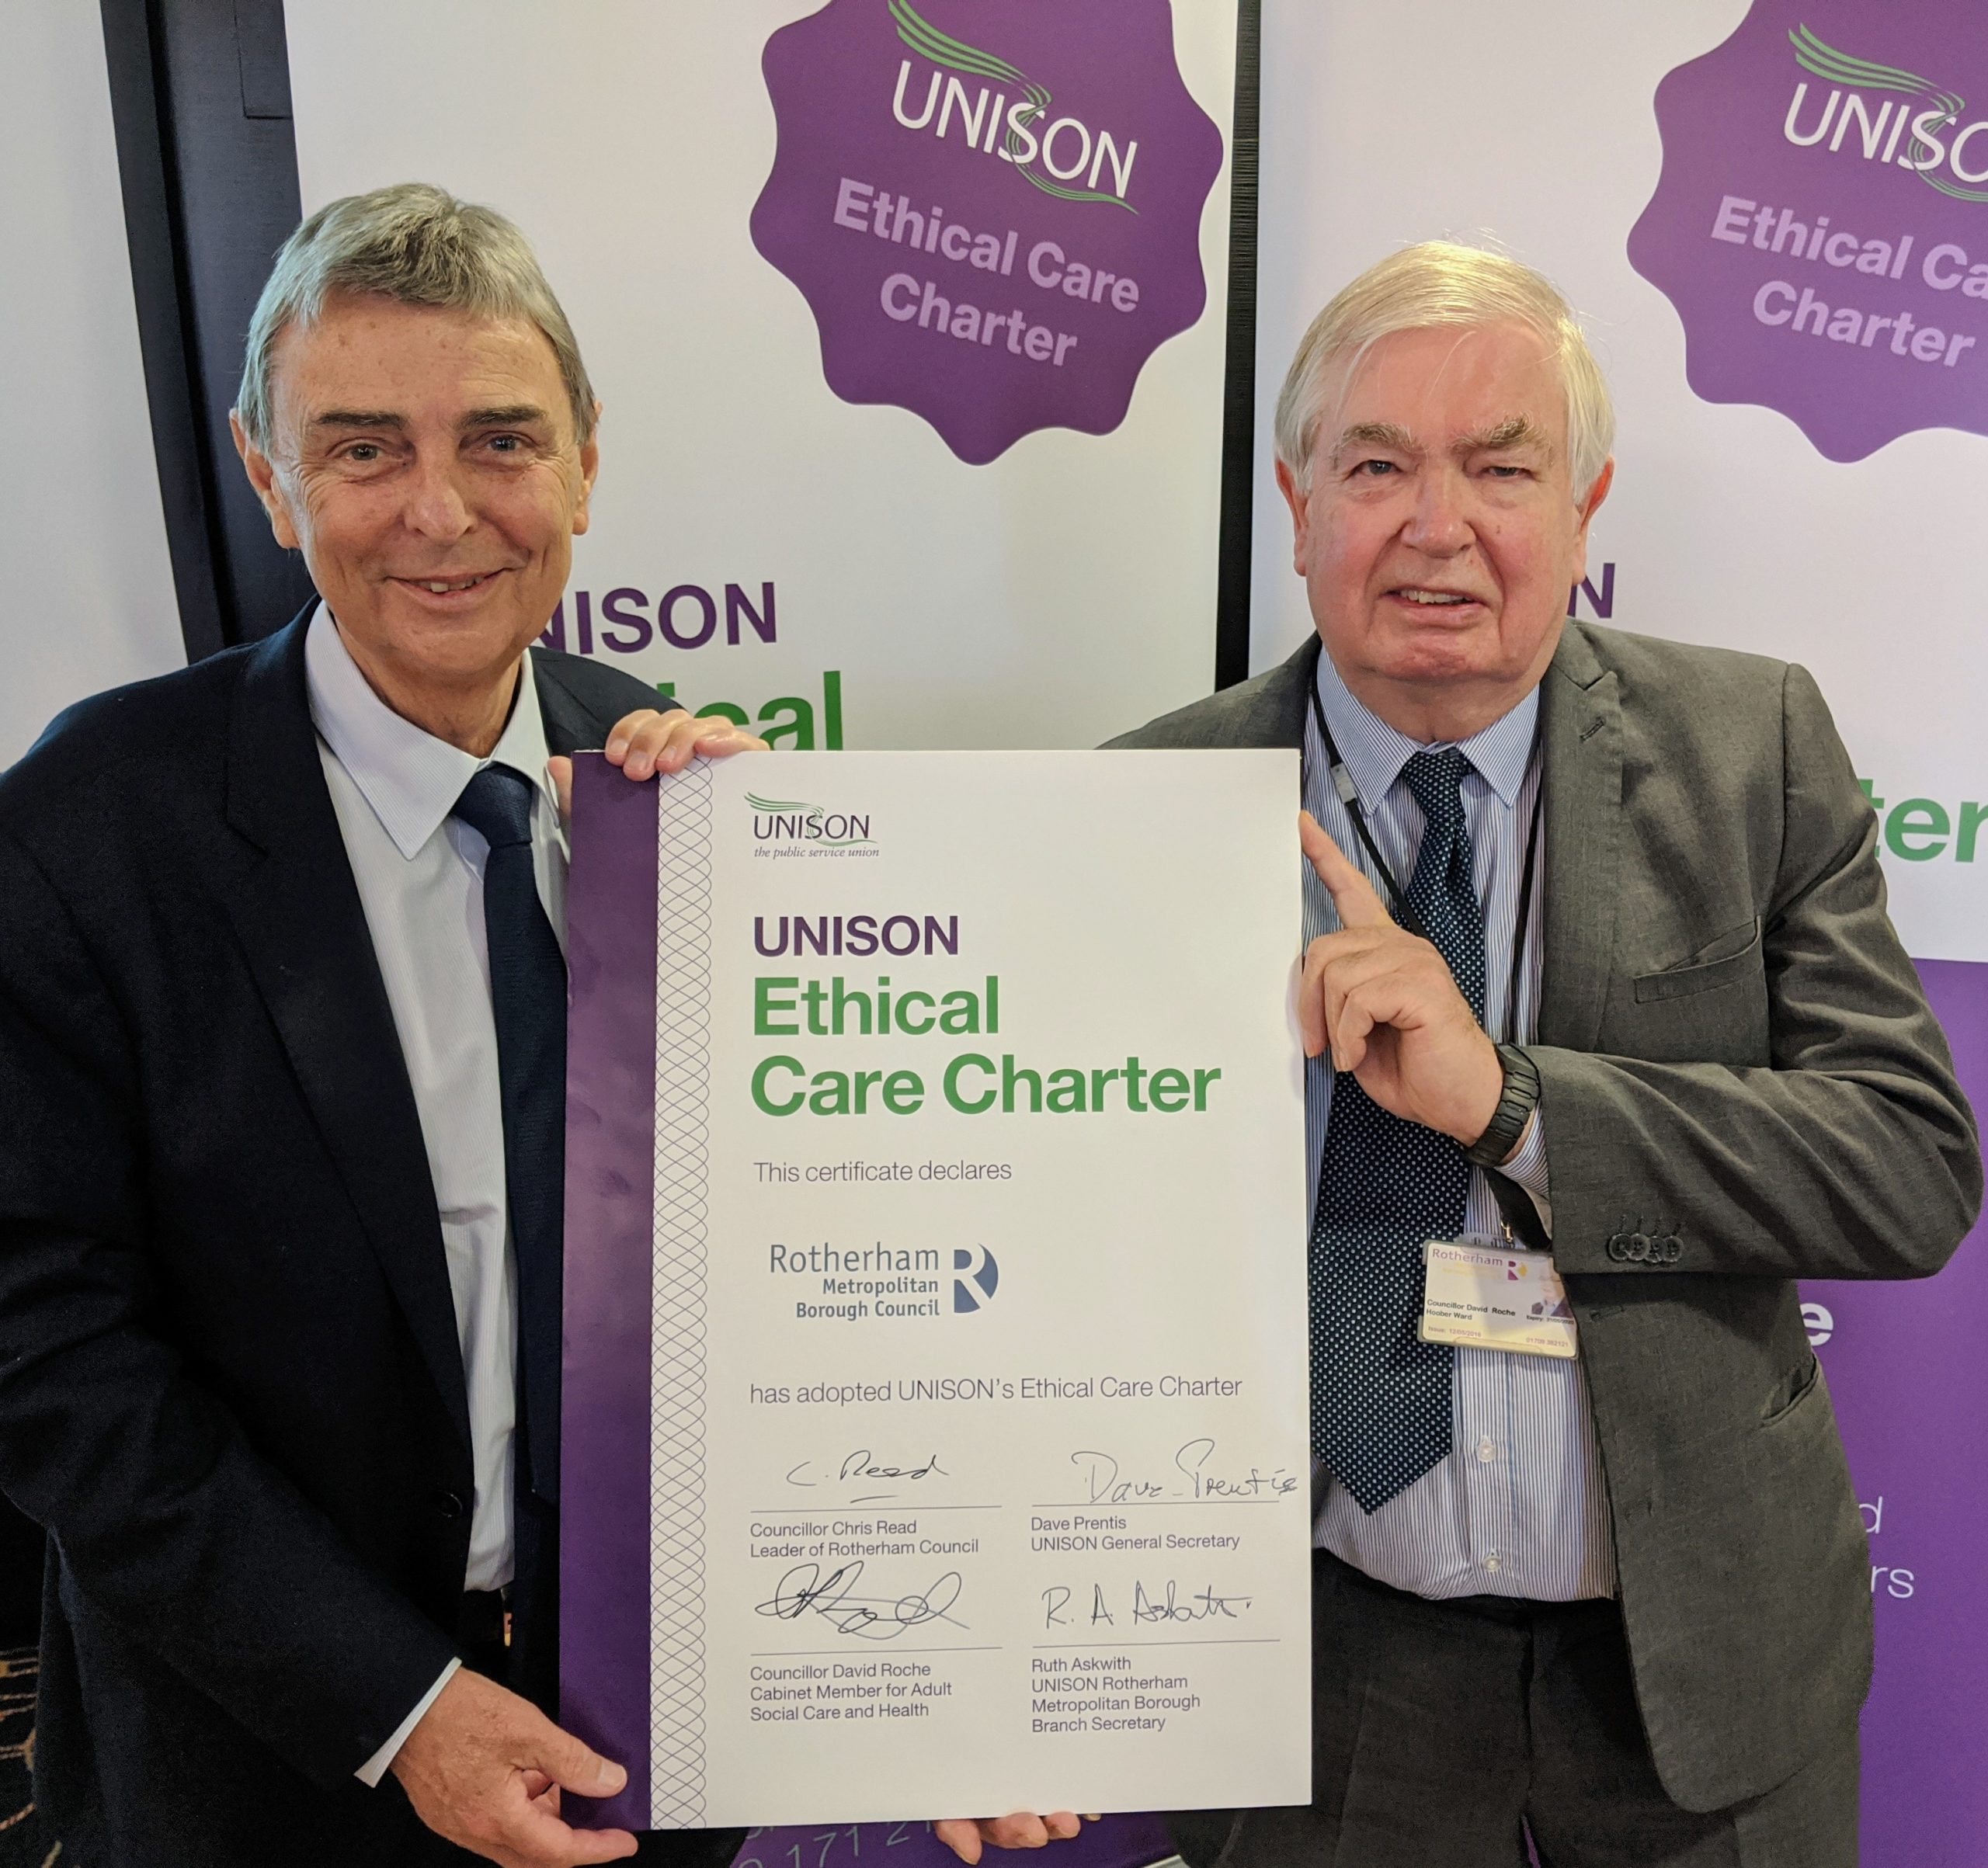 We have secured Unison’s Ethical Care Charter.